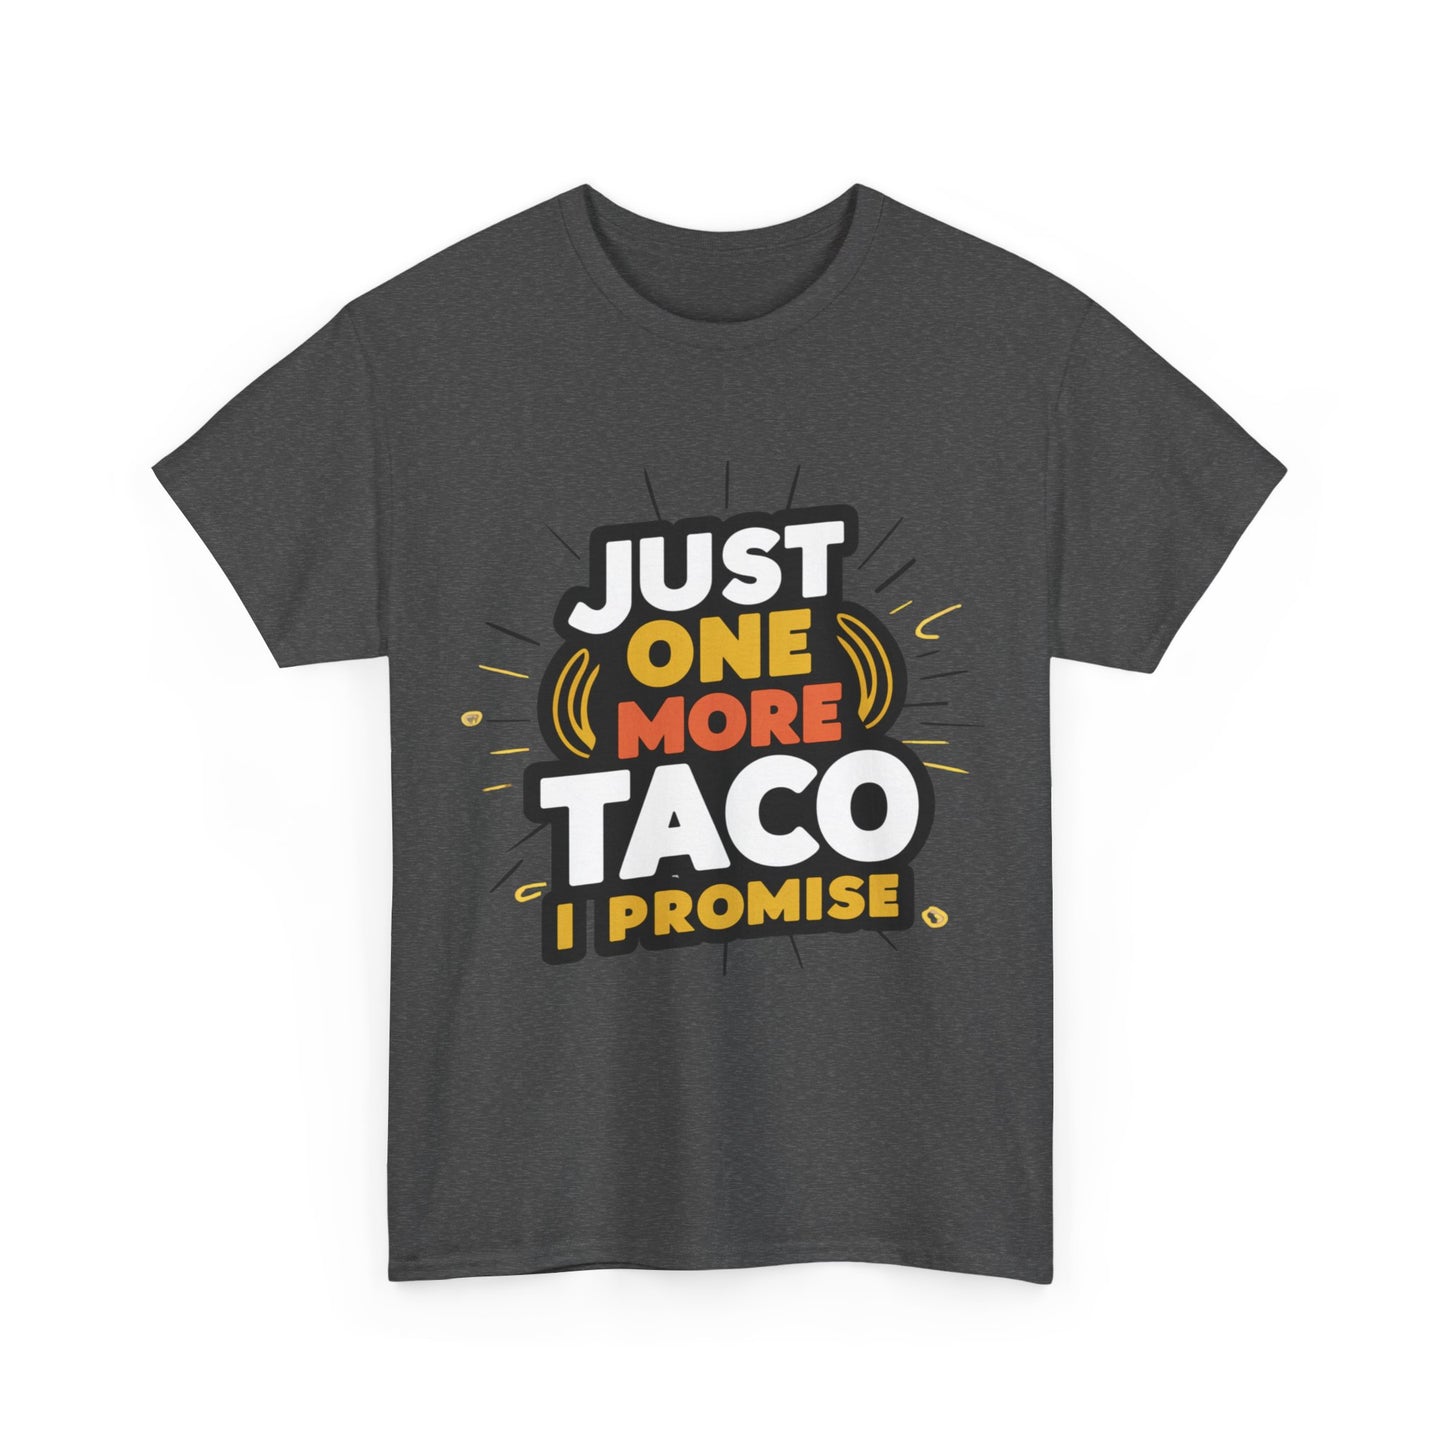 Just One More Taco I Promise Mexican Food Graphic Unisex Heavy Cotton Tee Cotton Funny Humorous Graphic Soft Premium Unisex Men Women Dark Heather T-shirt Birthday Gift-24